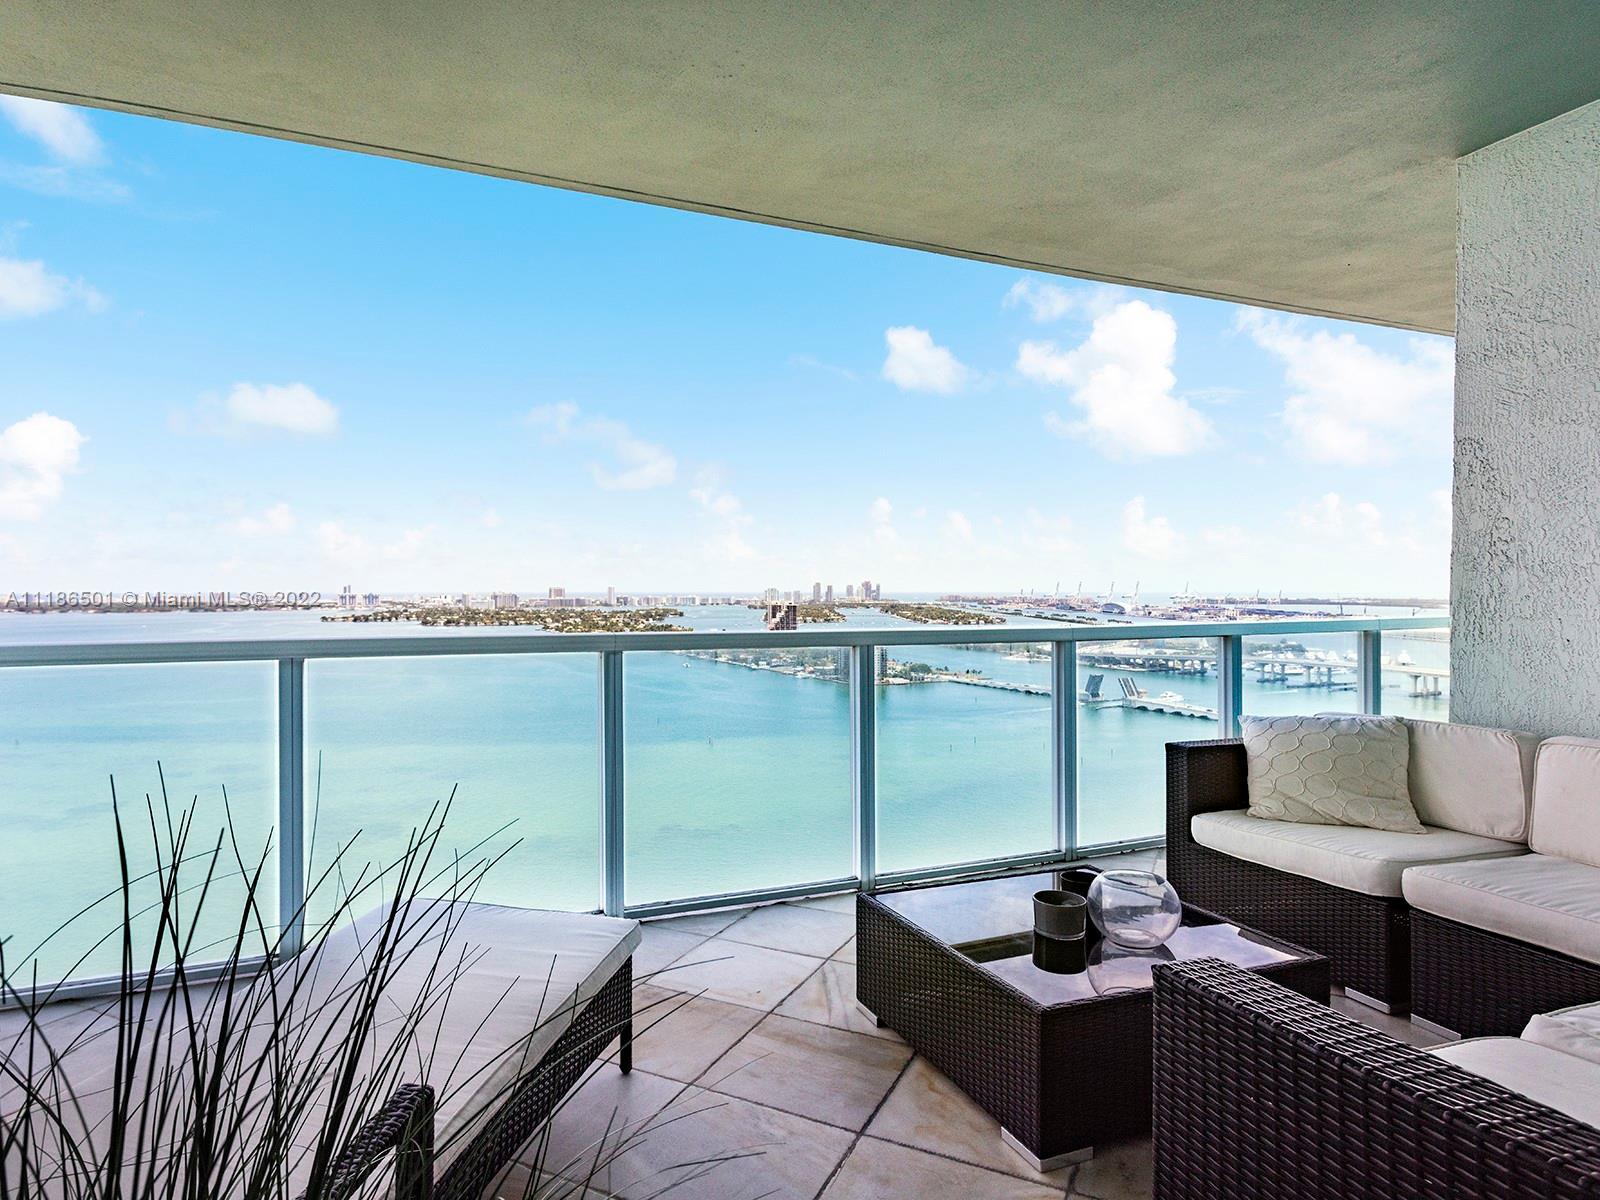 SPECTACULAR UNOBSTRUCTED BAY FRONT VIEWS FROM EVERY ROOM W/WRAPAROUND BALCONY, BEST LINE, 2BED+DEN T